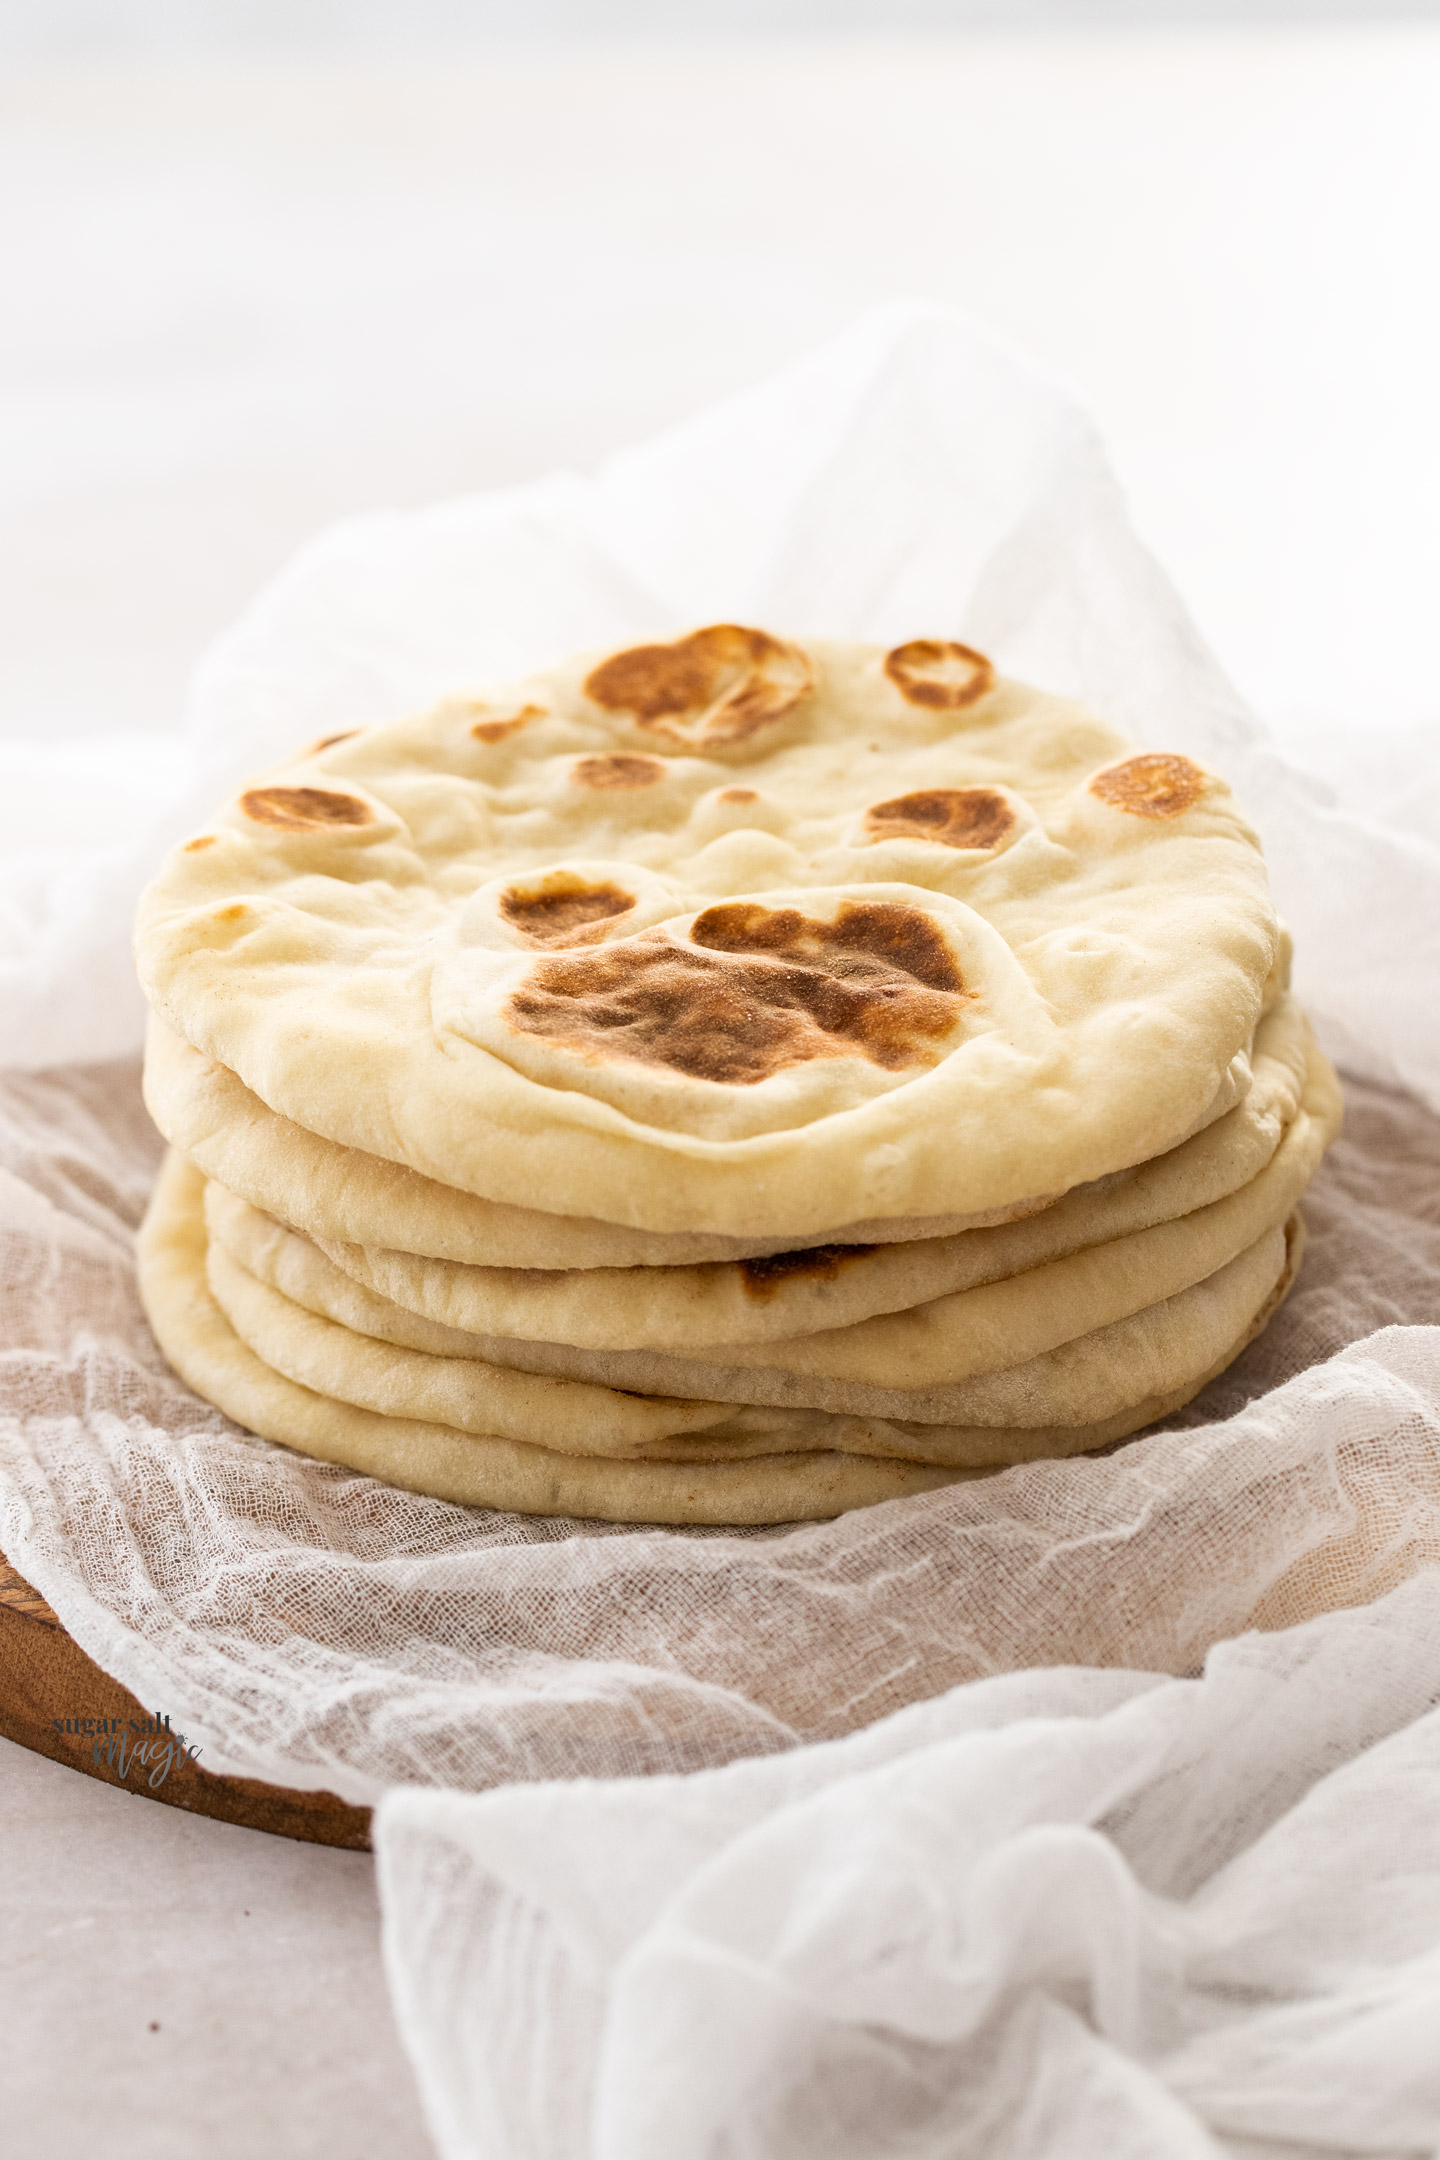 A stack of 6 flatbreads on a wooden board.